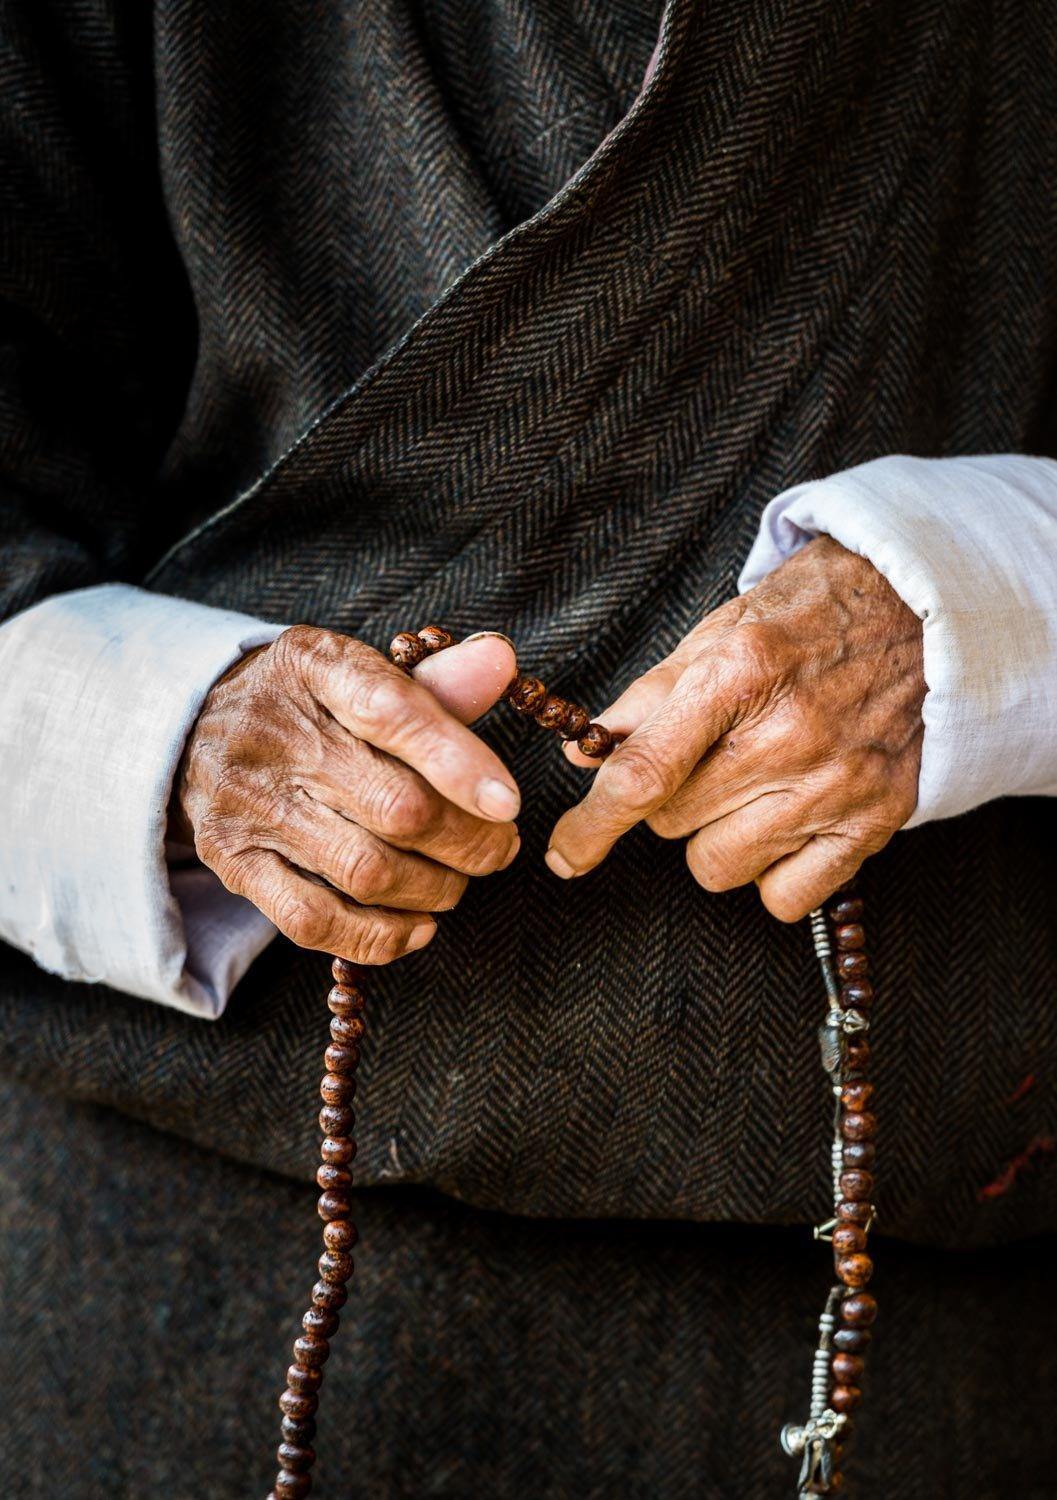 A close-up shot of an old human's hand holding prayer beads and wearing a black gown with white sleeves, Bhutan prayer beads